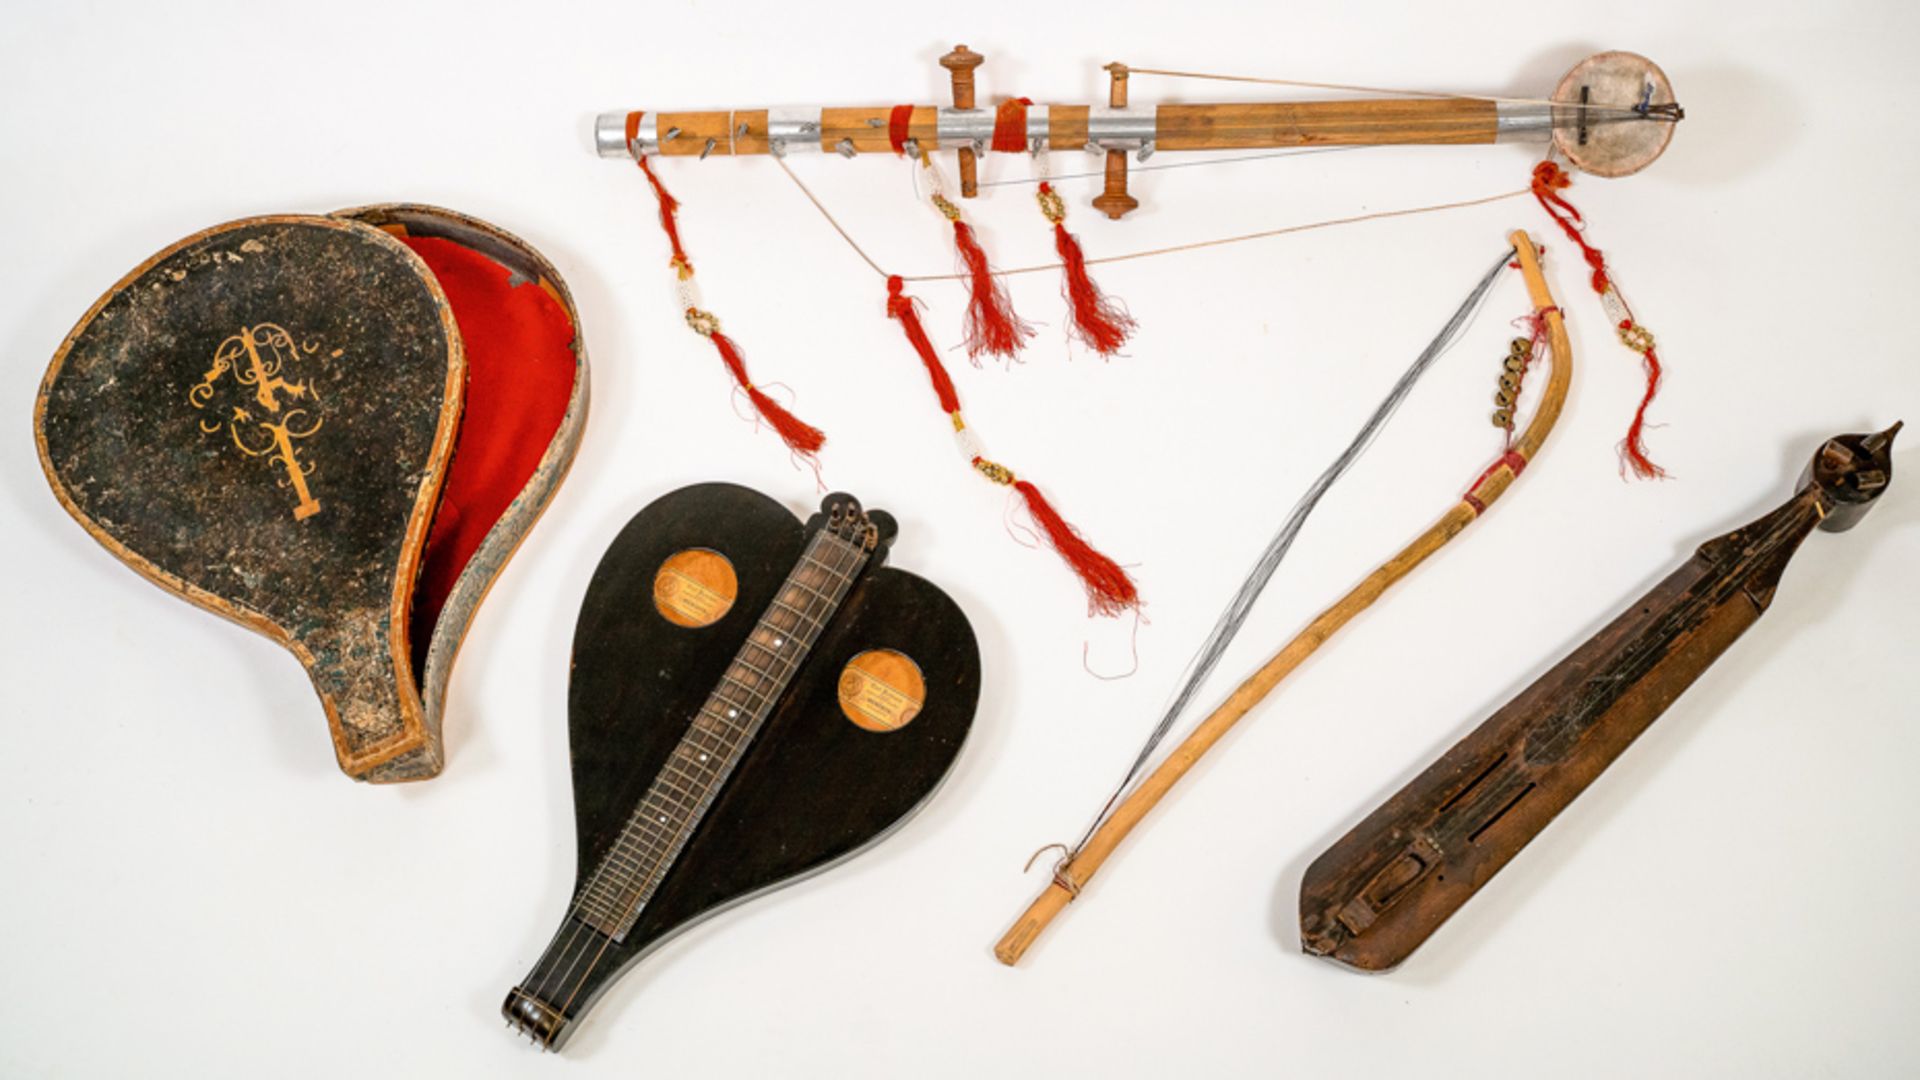 CONVOLUTE OF PONTIC/CRETIC LYRA, STRING ZITHER AND INDIAN RAAVAN HATHA